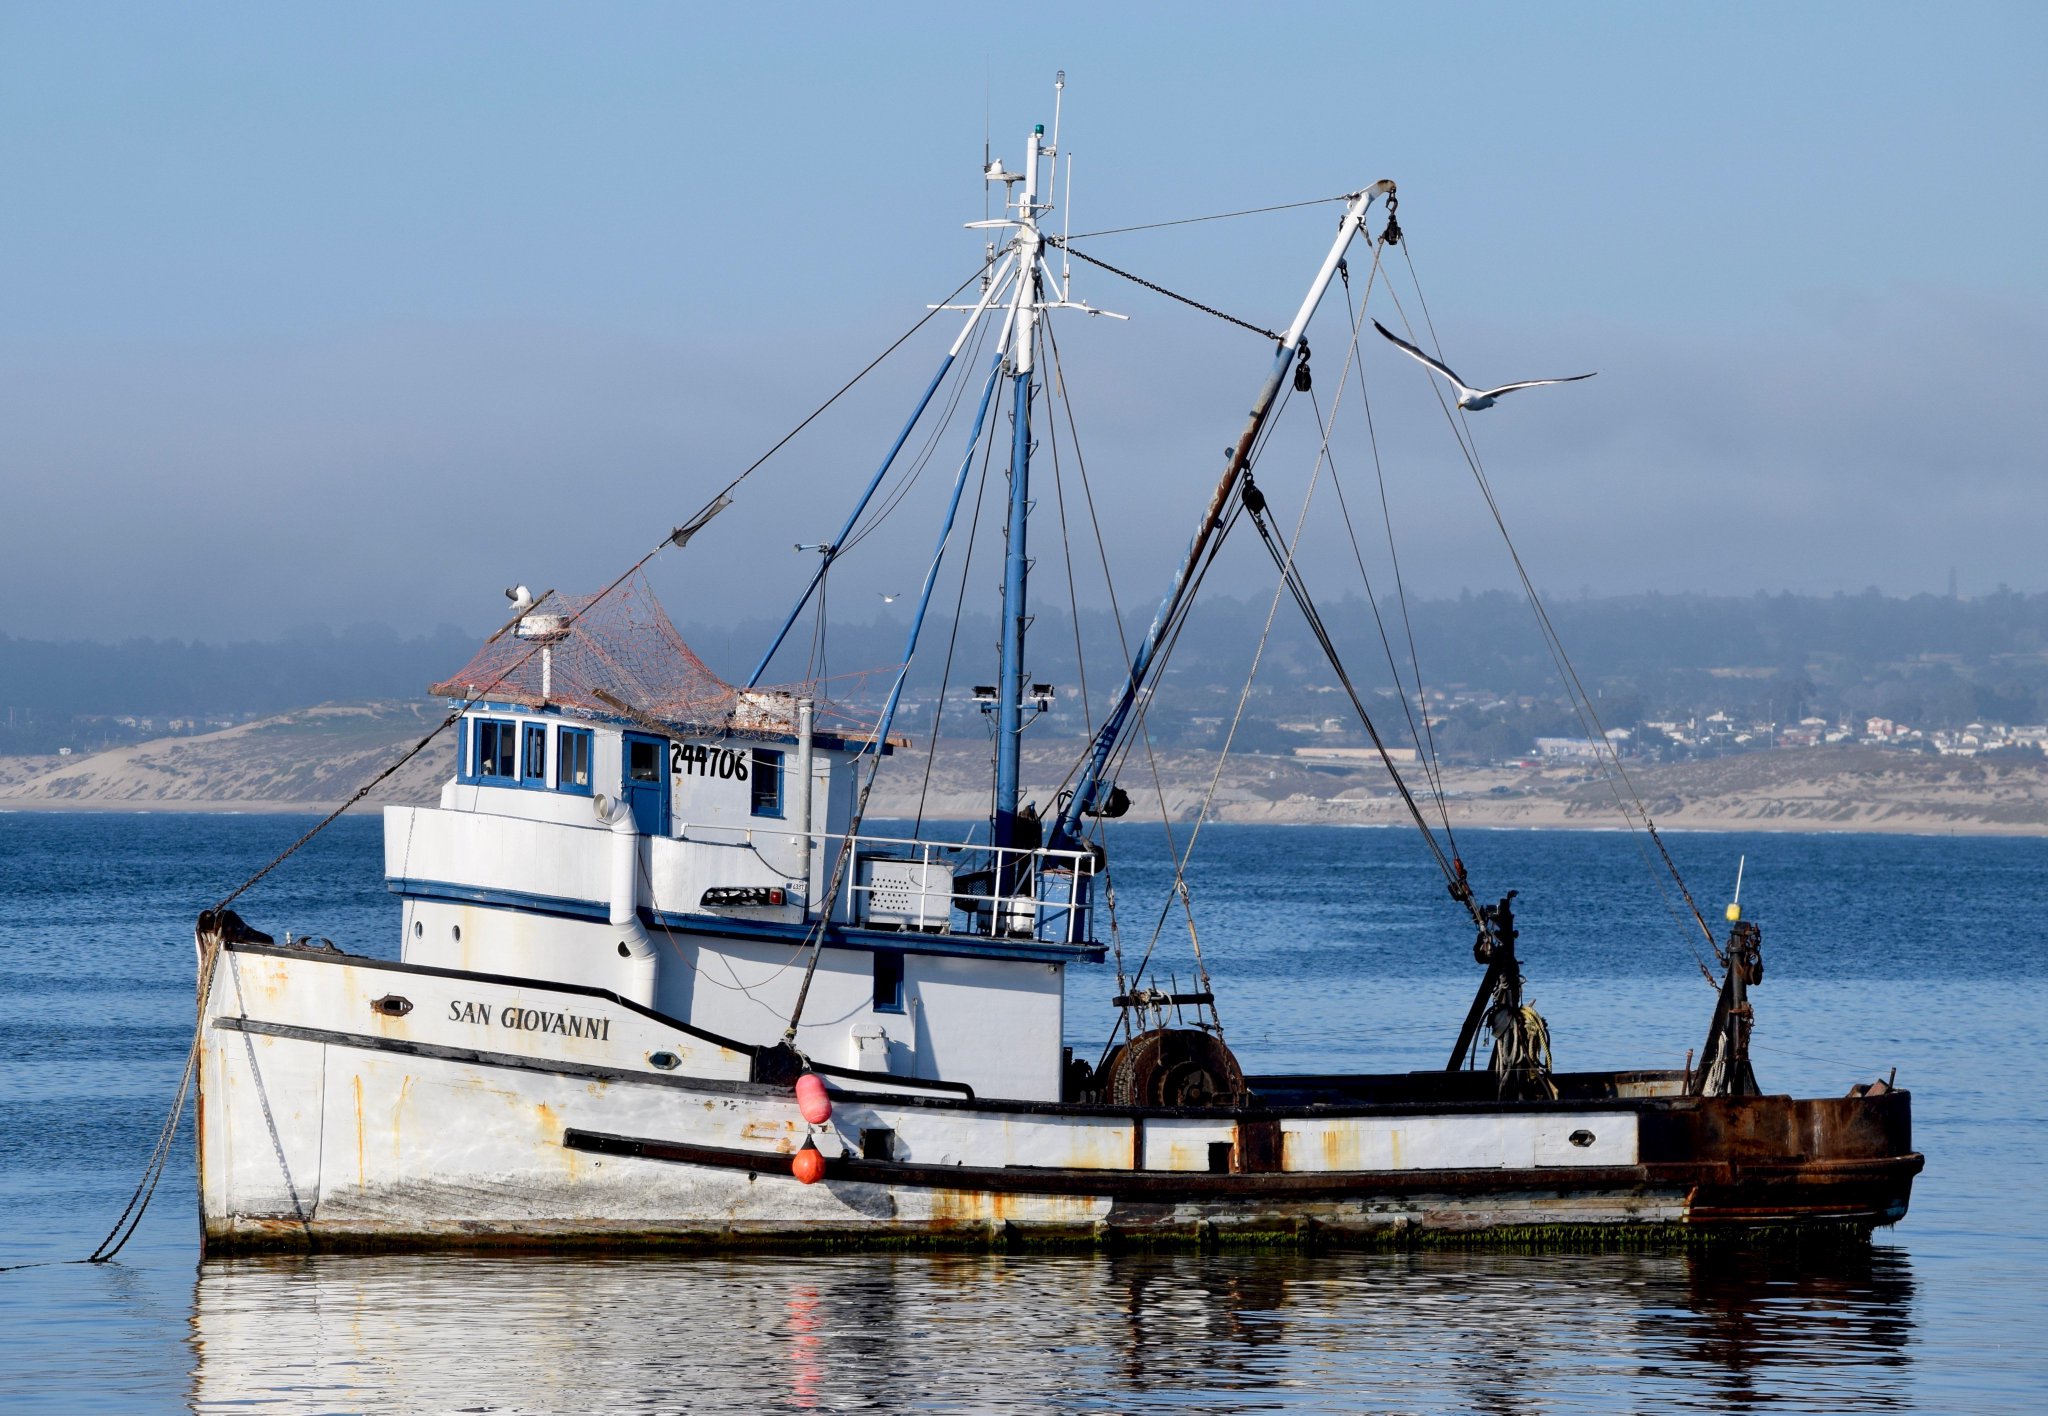 City of Monterey on X: Iconic #fishing boat the San Giovanni, the